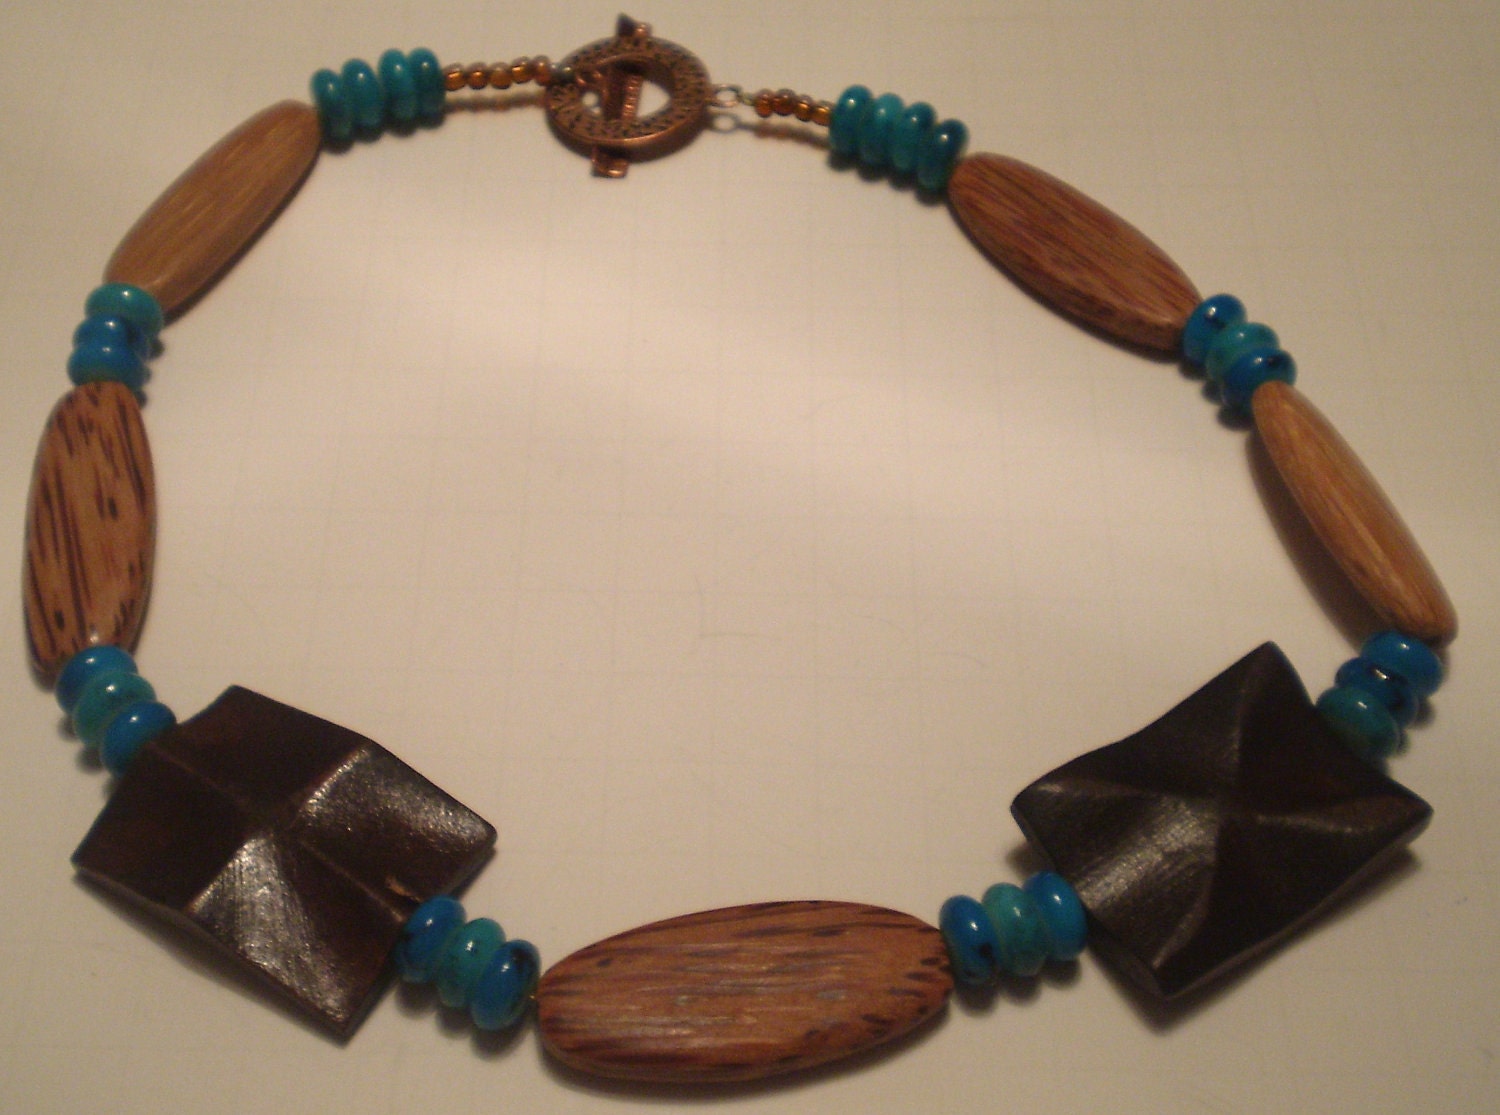 Necklace and Earring Set Southwestern Medium Brown Wood and Turquoise Glass